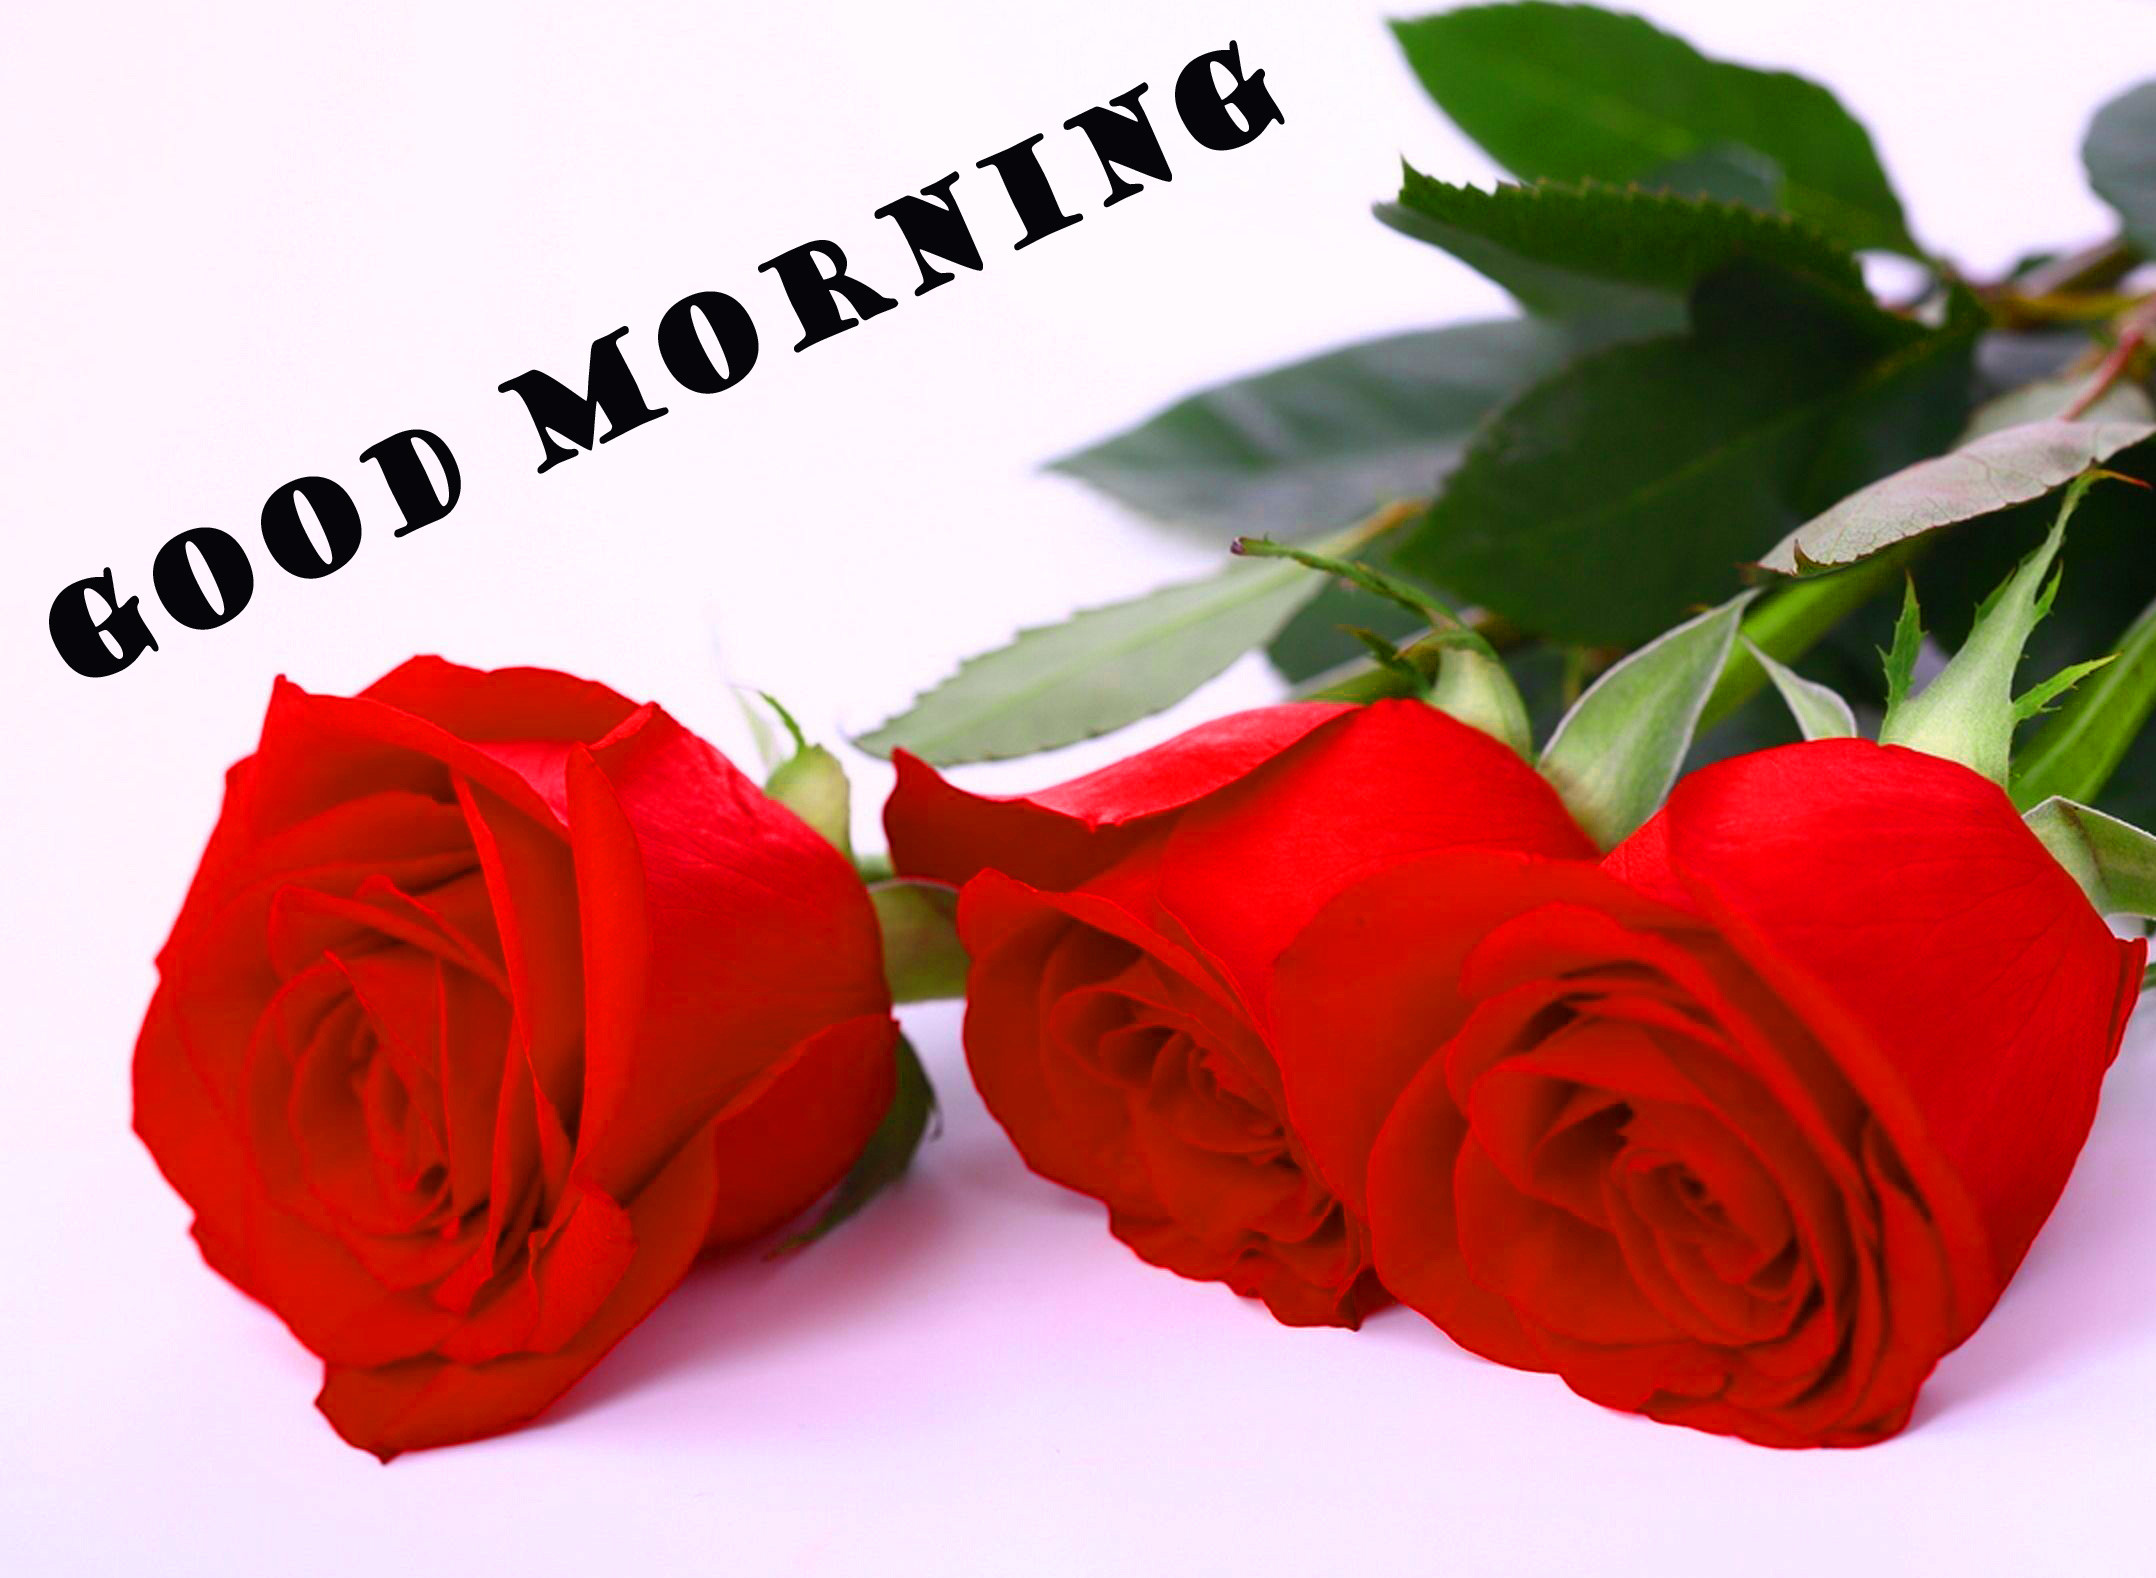 Good Morning Red Rose Wallpaper Pictures Images Hd - Love Rose Images Free Download - HD Wallpaper 